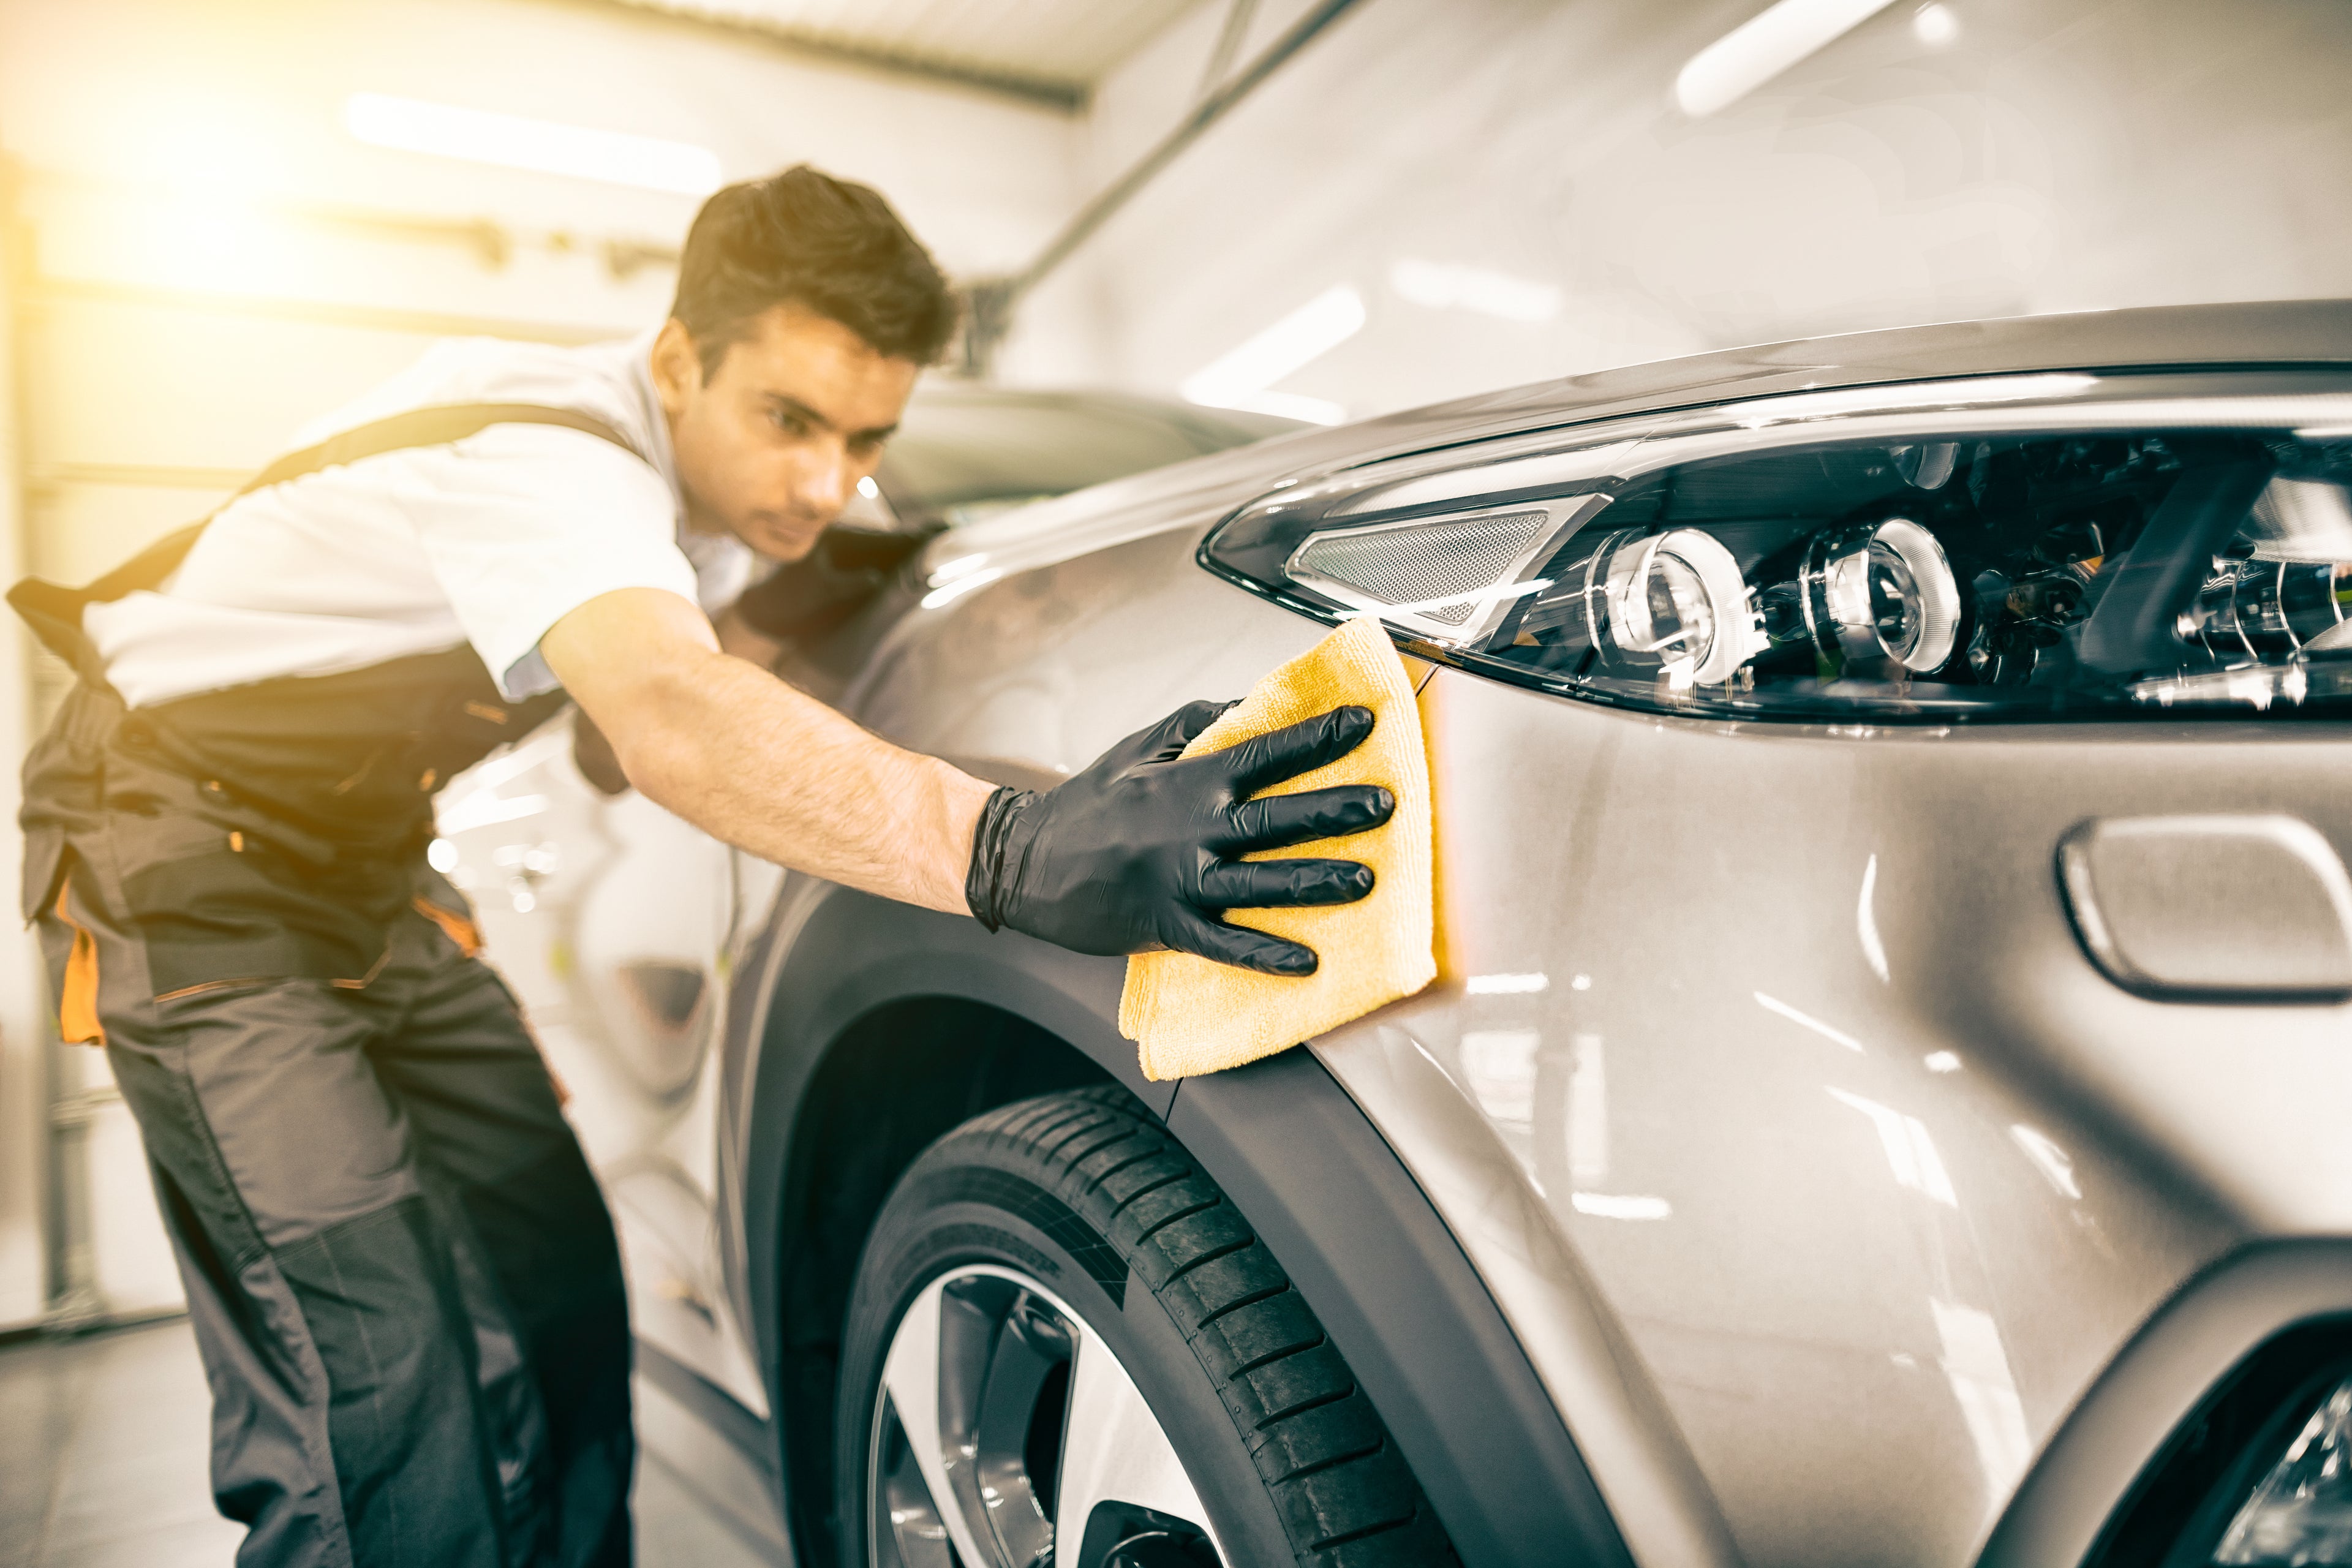 Come home to a clean car! Book a car wash with Qantas Valet parking.